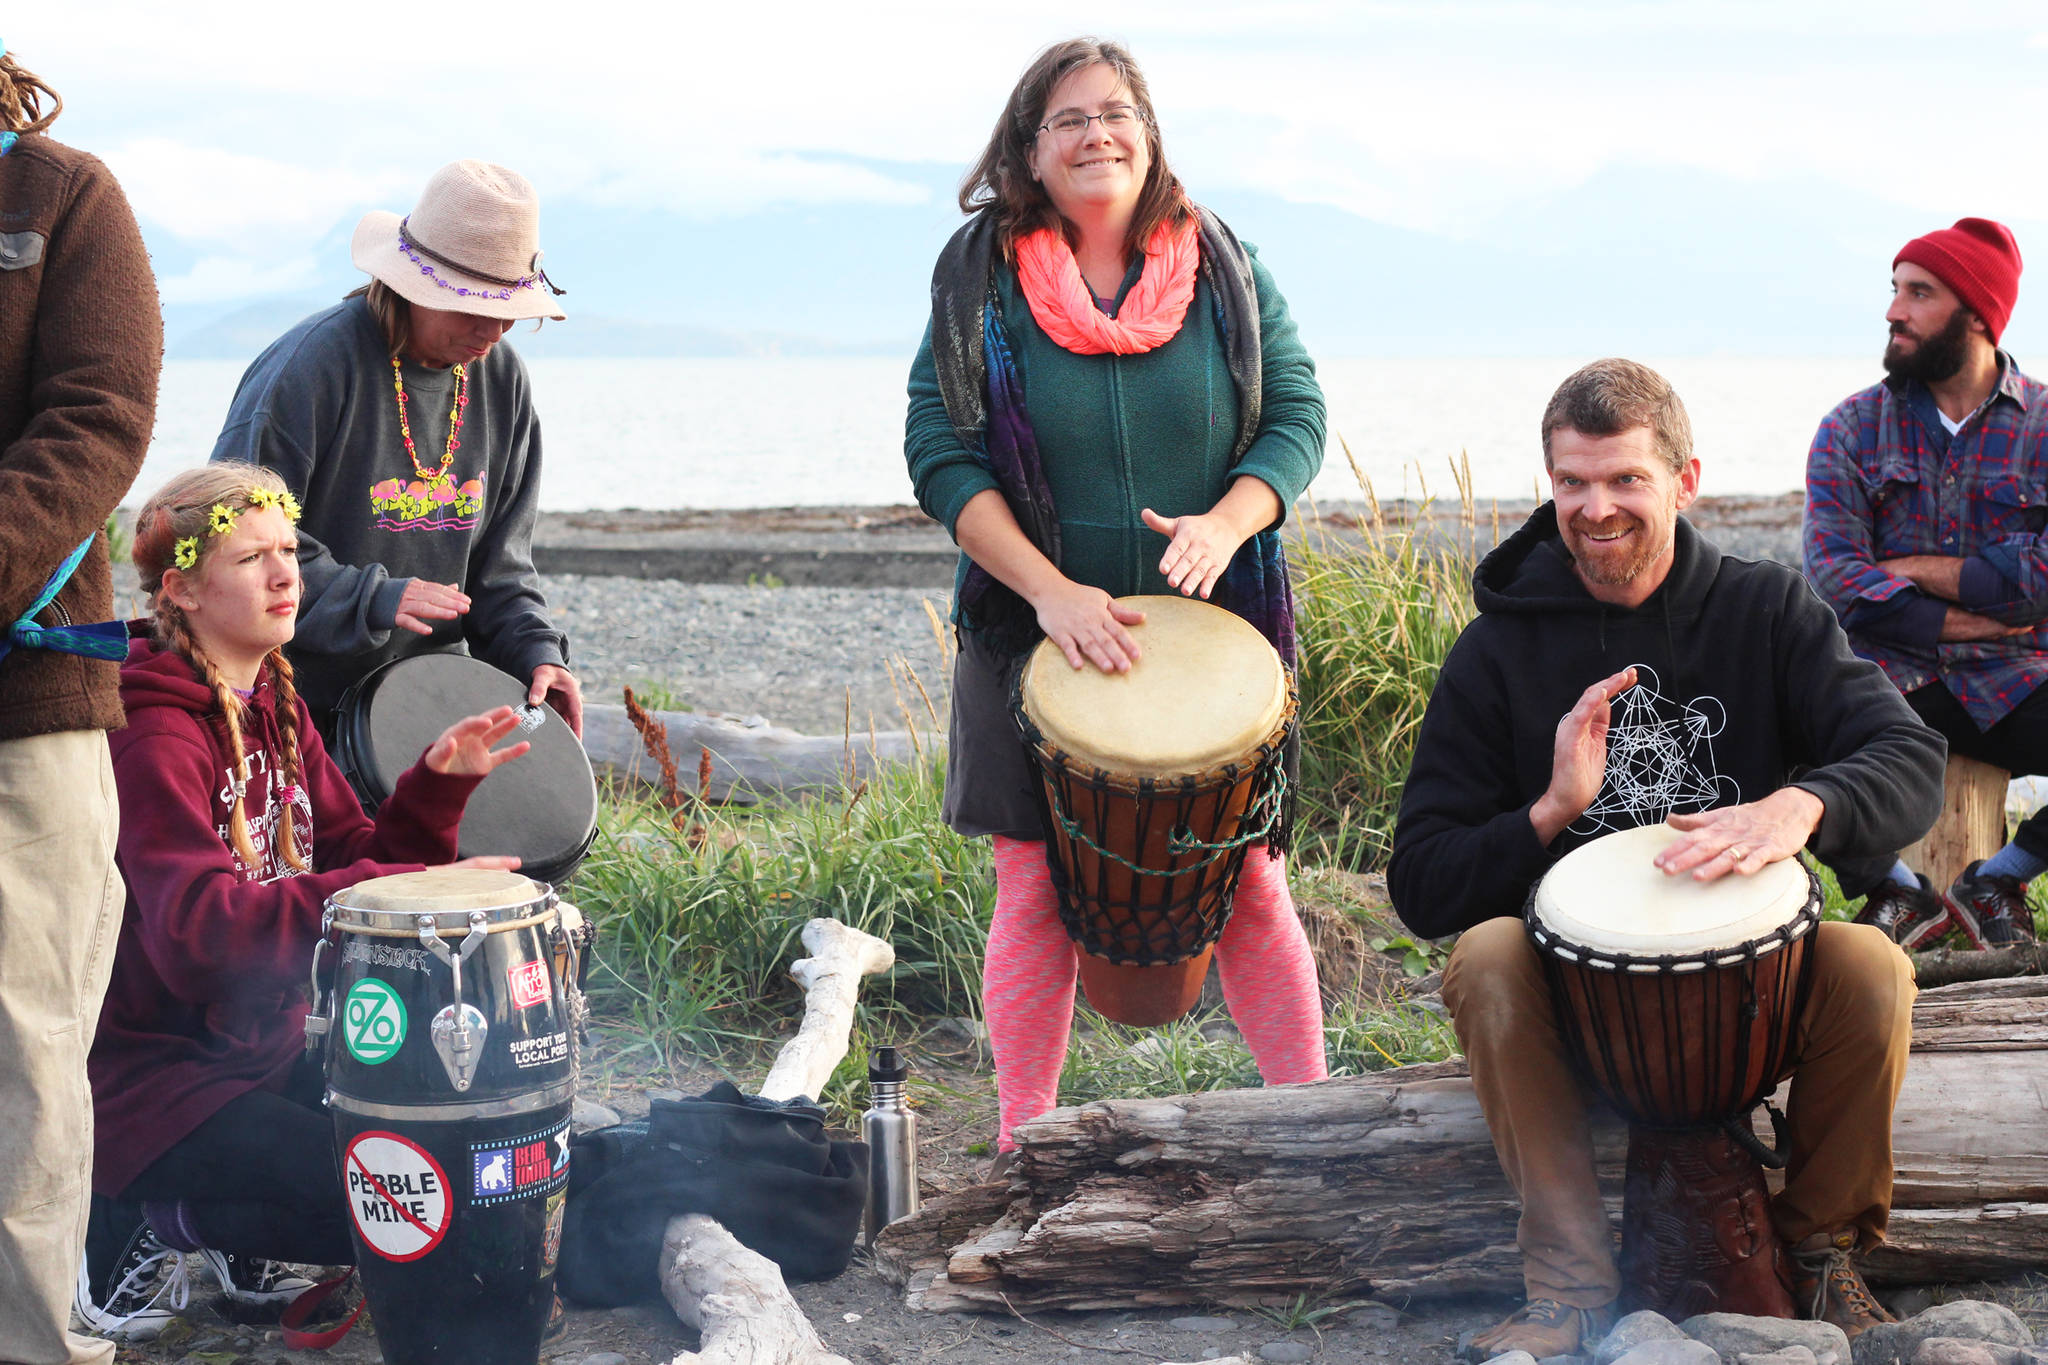 Drummers play music around a fire during the end-of-the-week celebration of the 14th annual Burning Basket Project on Sunday, Sept. 10, 2017 in Mariner Park in Homer, Alaska. (Photo by Megan Pacer/Homer News)